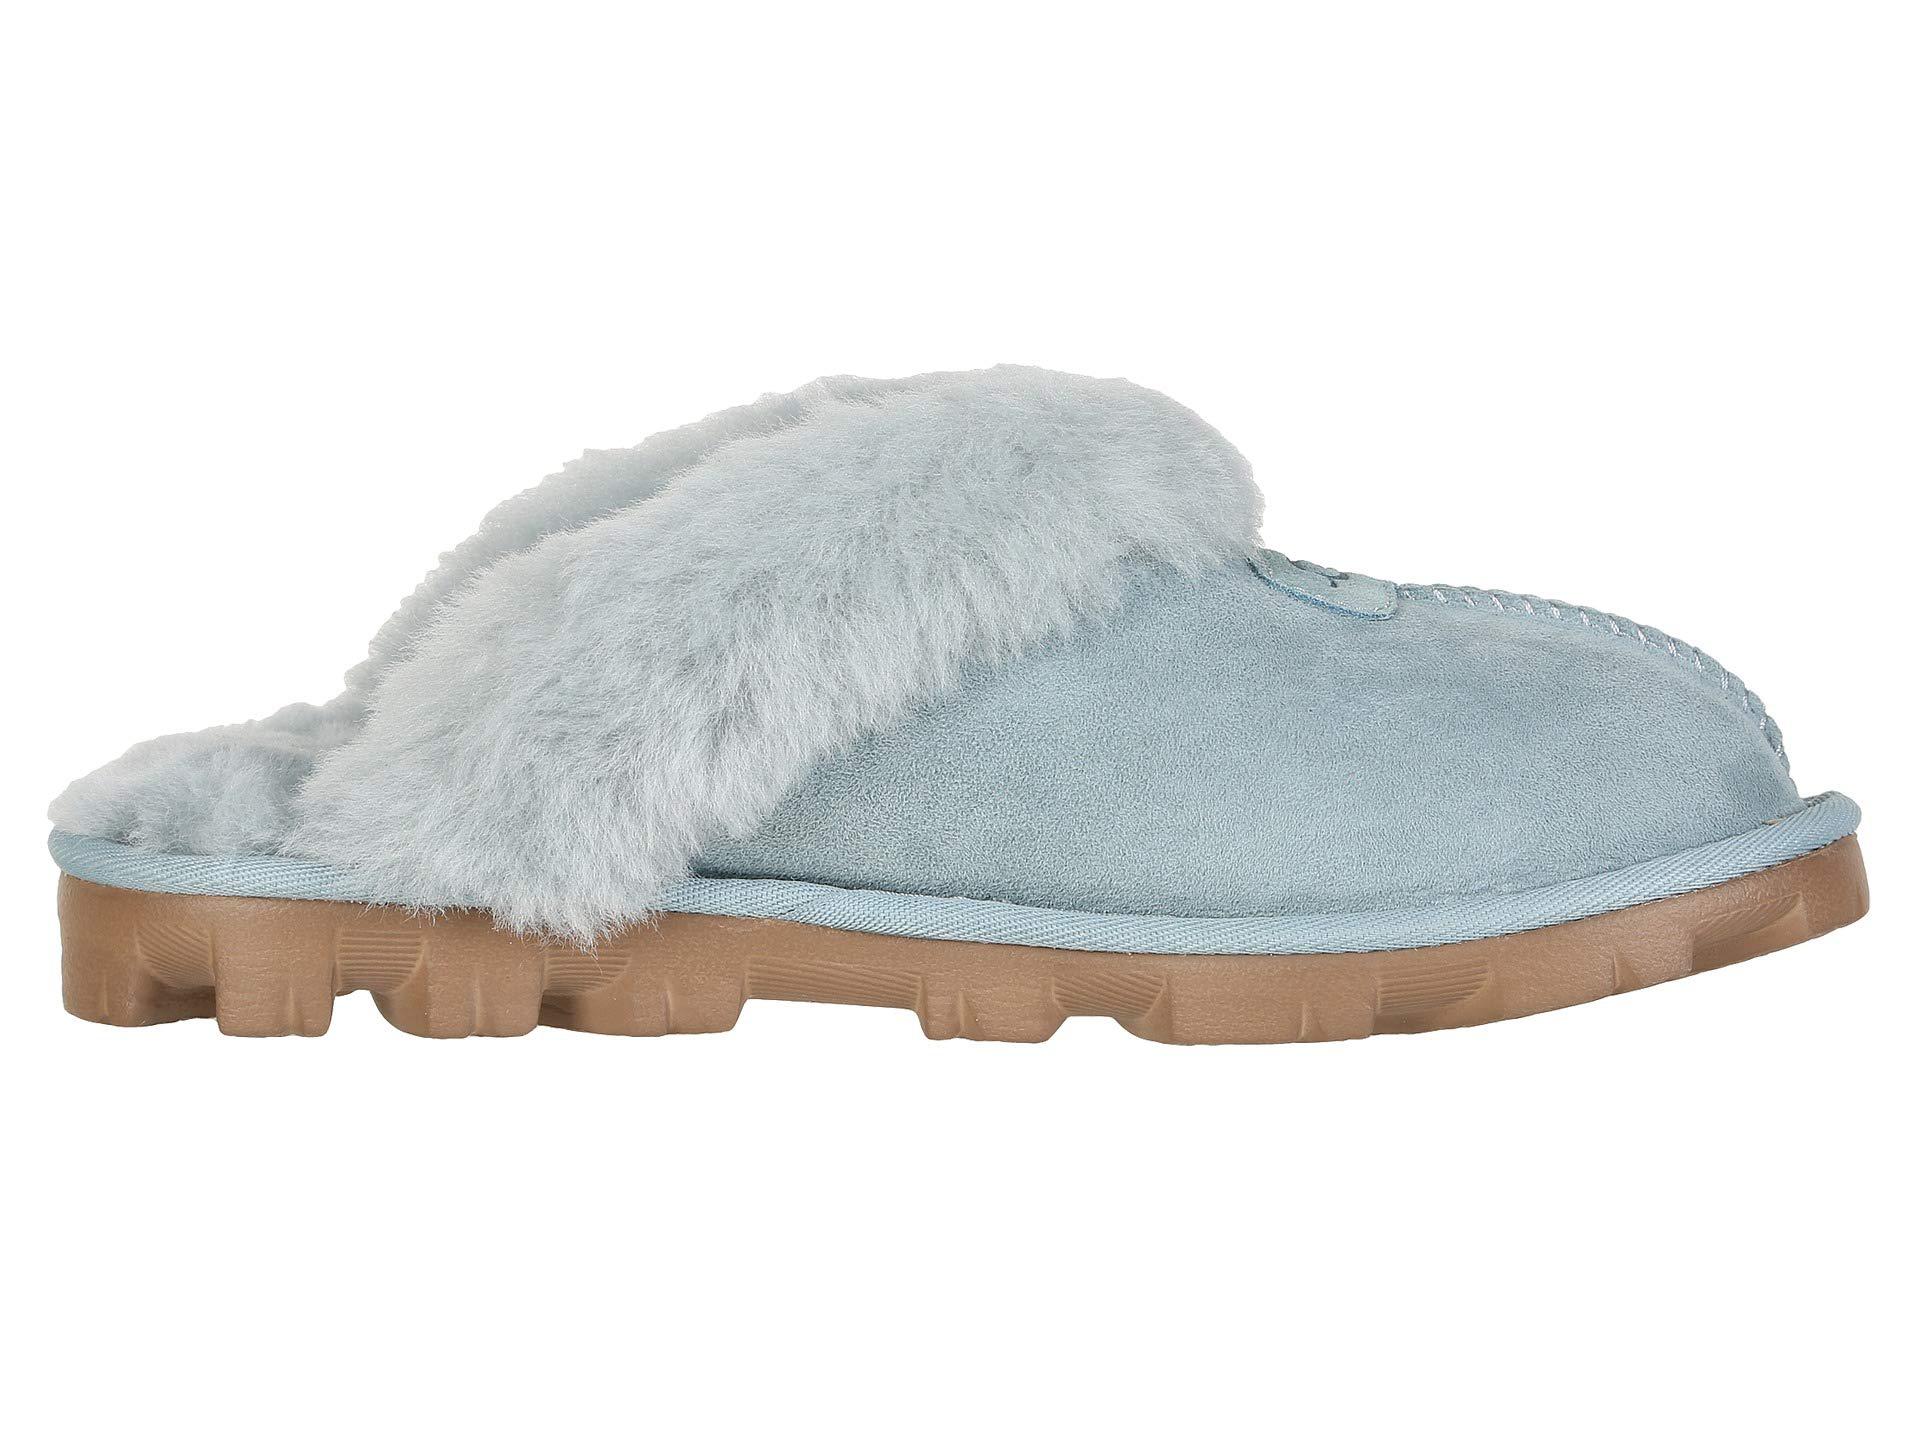 succulent ugg slippers